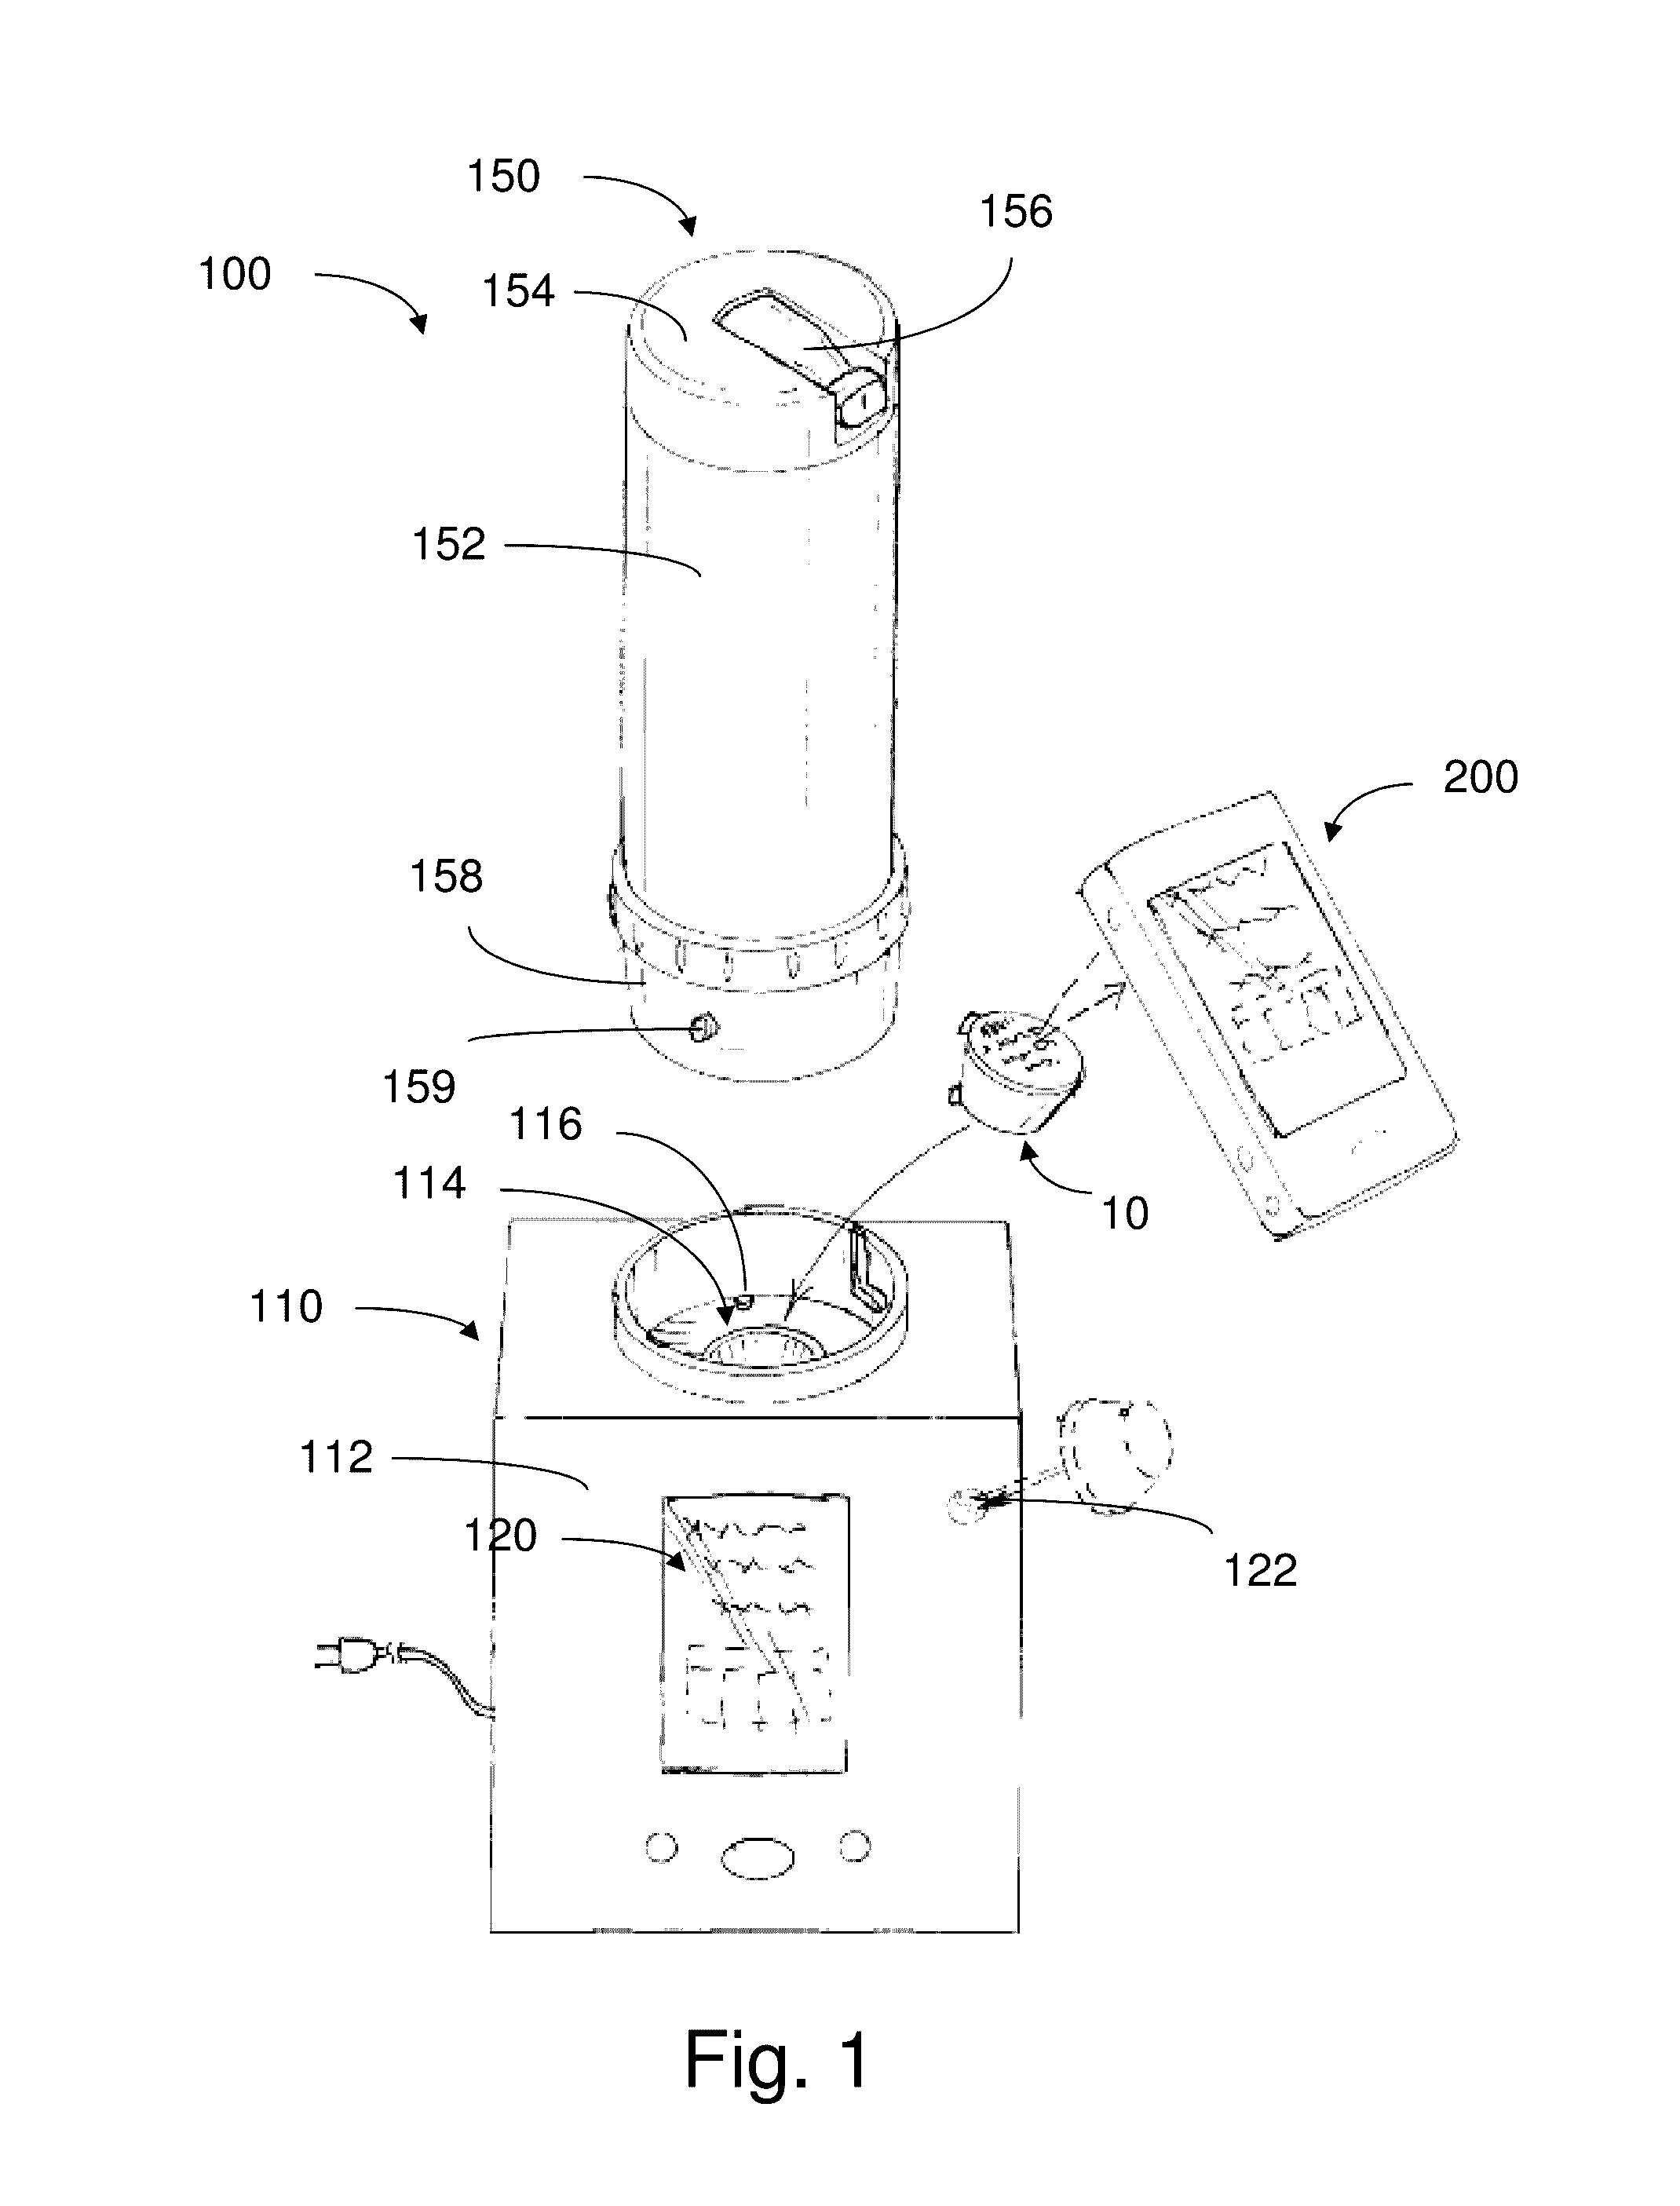 Methods and apparatus for producing herbal vapor